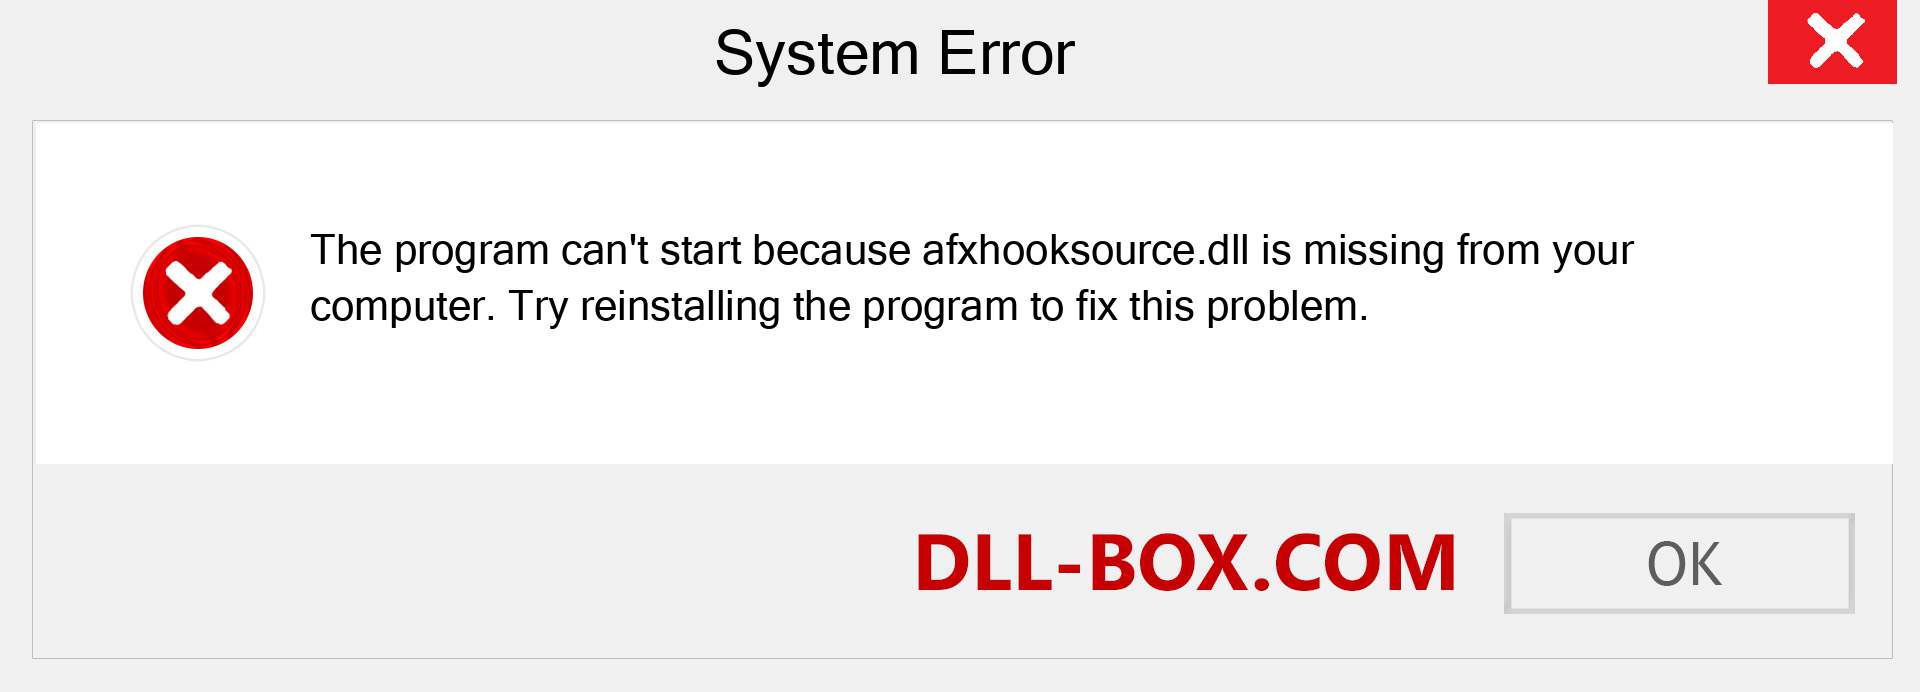  afxhooksource.dll file is missing?. Download for Windows 7, 8, 10 - Fix  afxhooksource dll Missing Error on Windows, photos, images